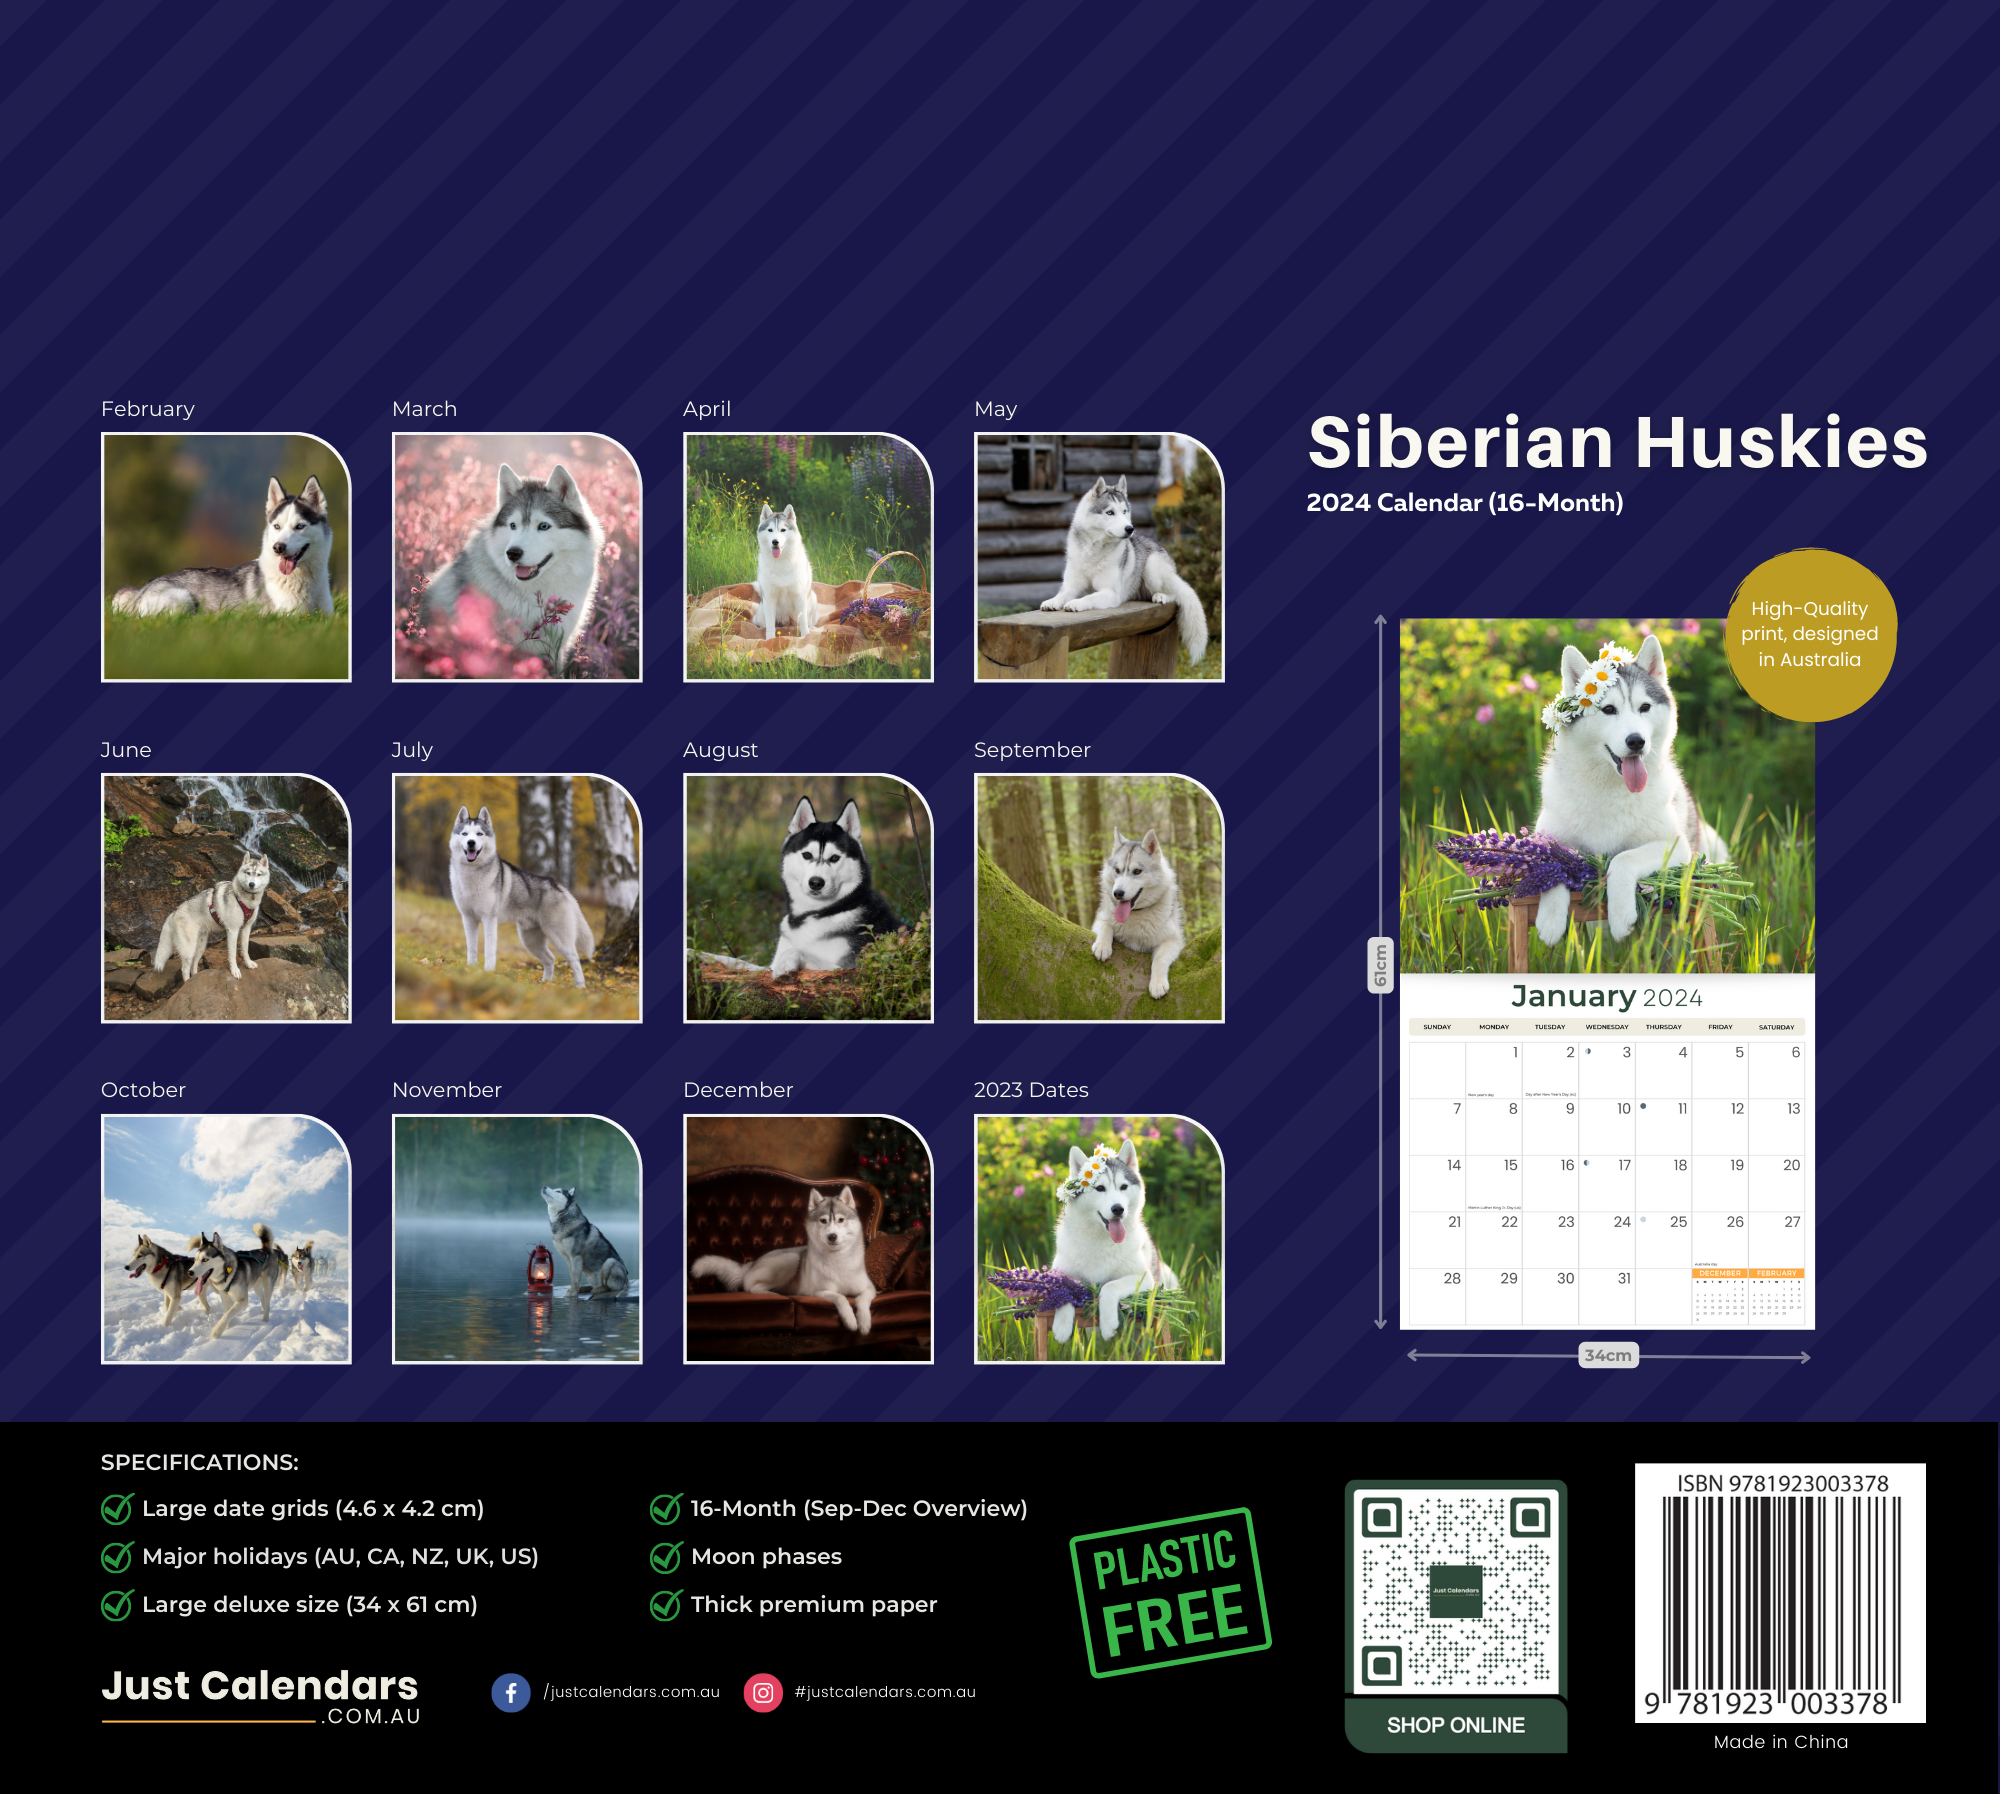 2024 Siberian Huskies Dogs & Puppies - Deluxe Wall Calendar by Just Calendars - 16 Month - Plastic Free